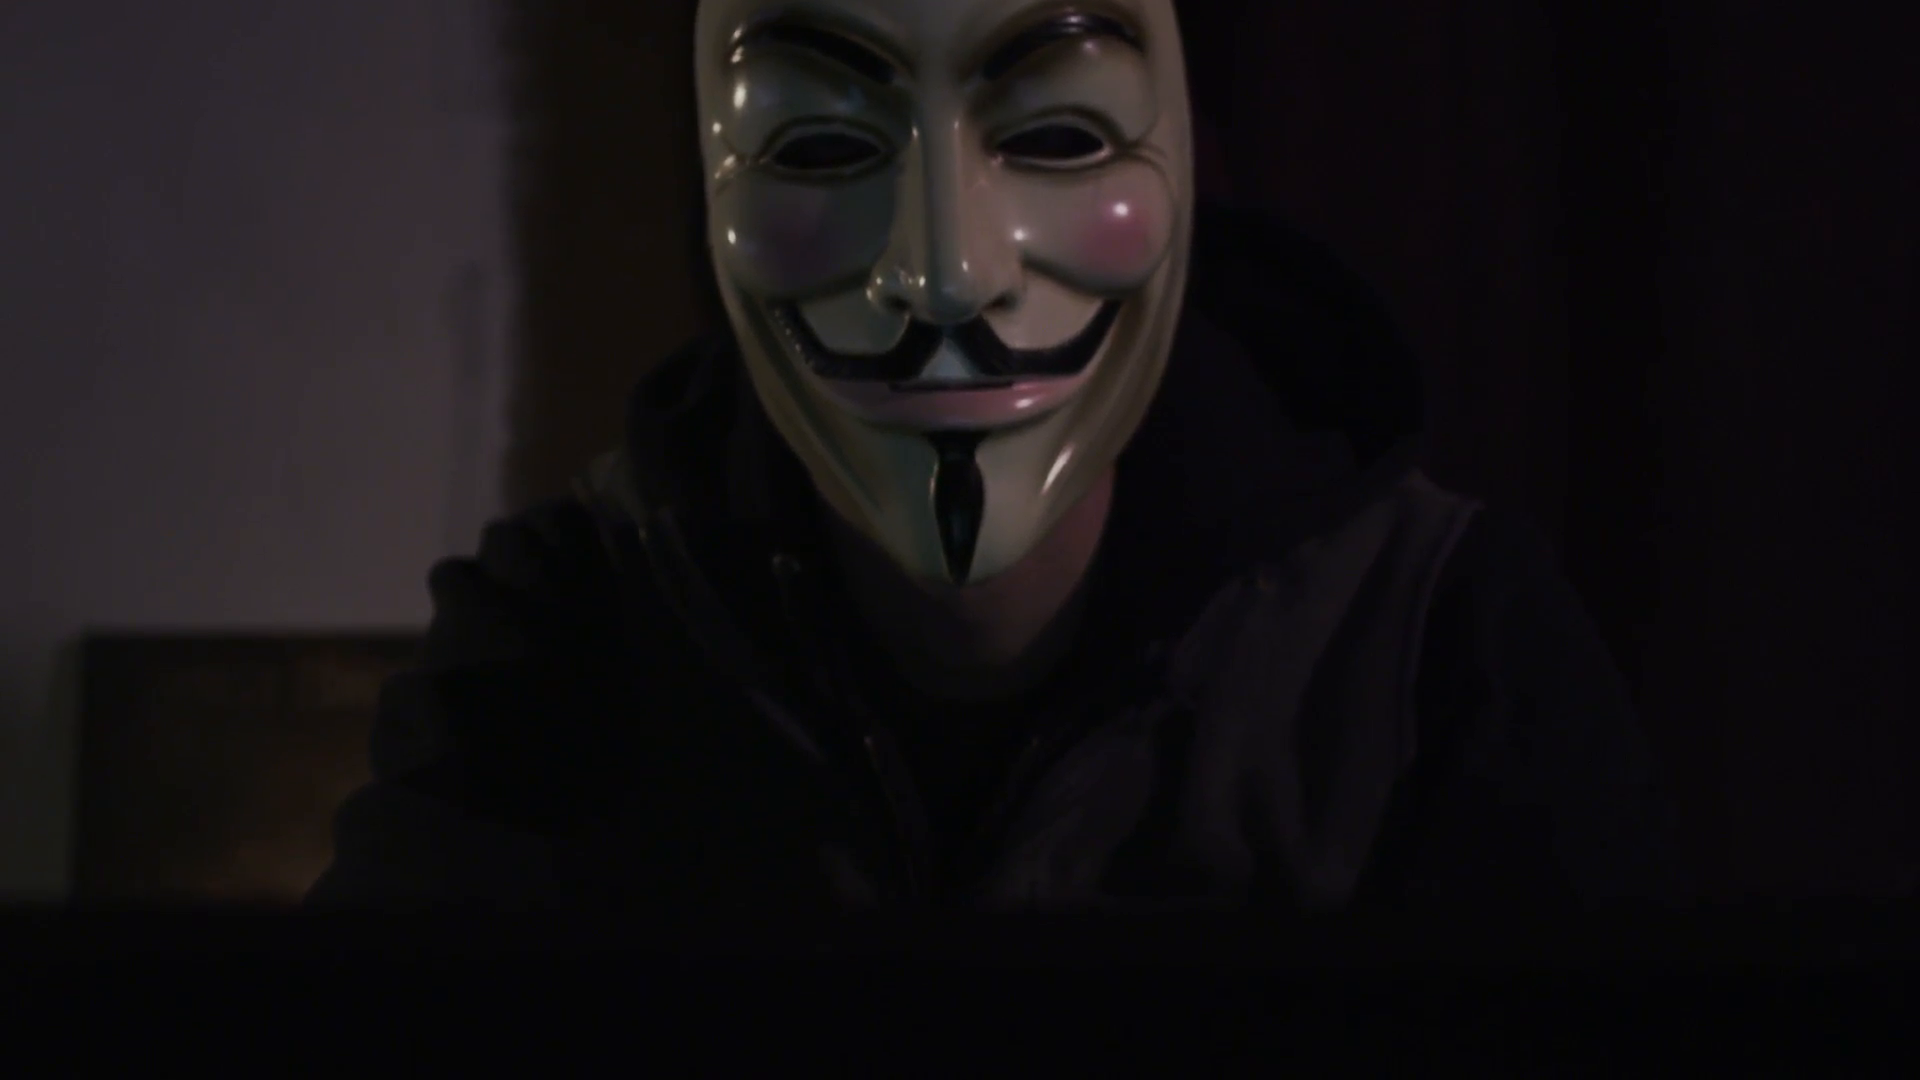 Anonymous Hacker wearing Guy Fawkes Mask - Cyber Crime Stock Video ...